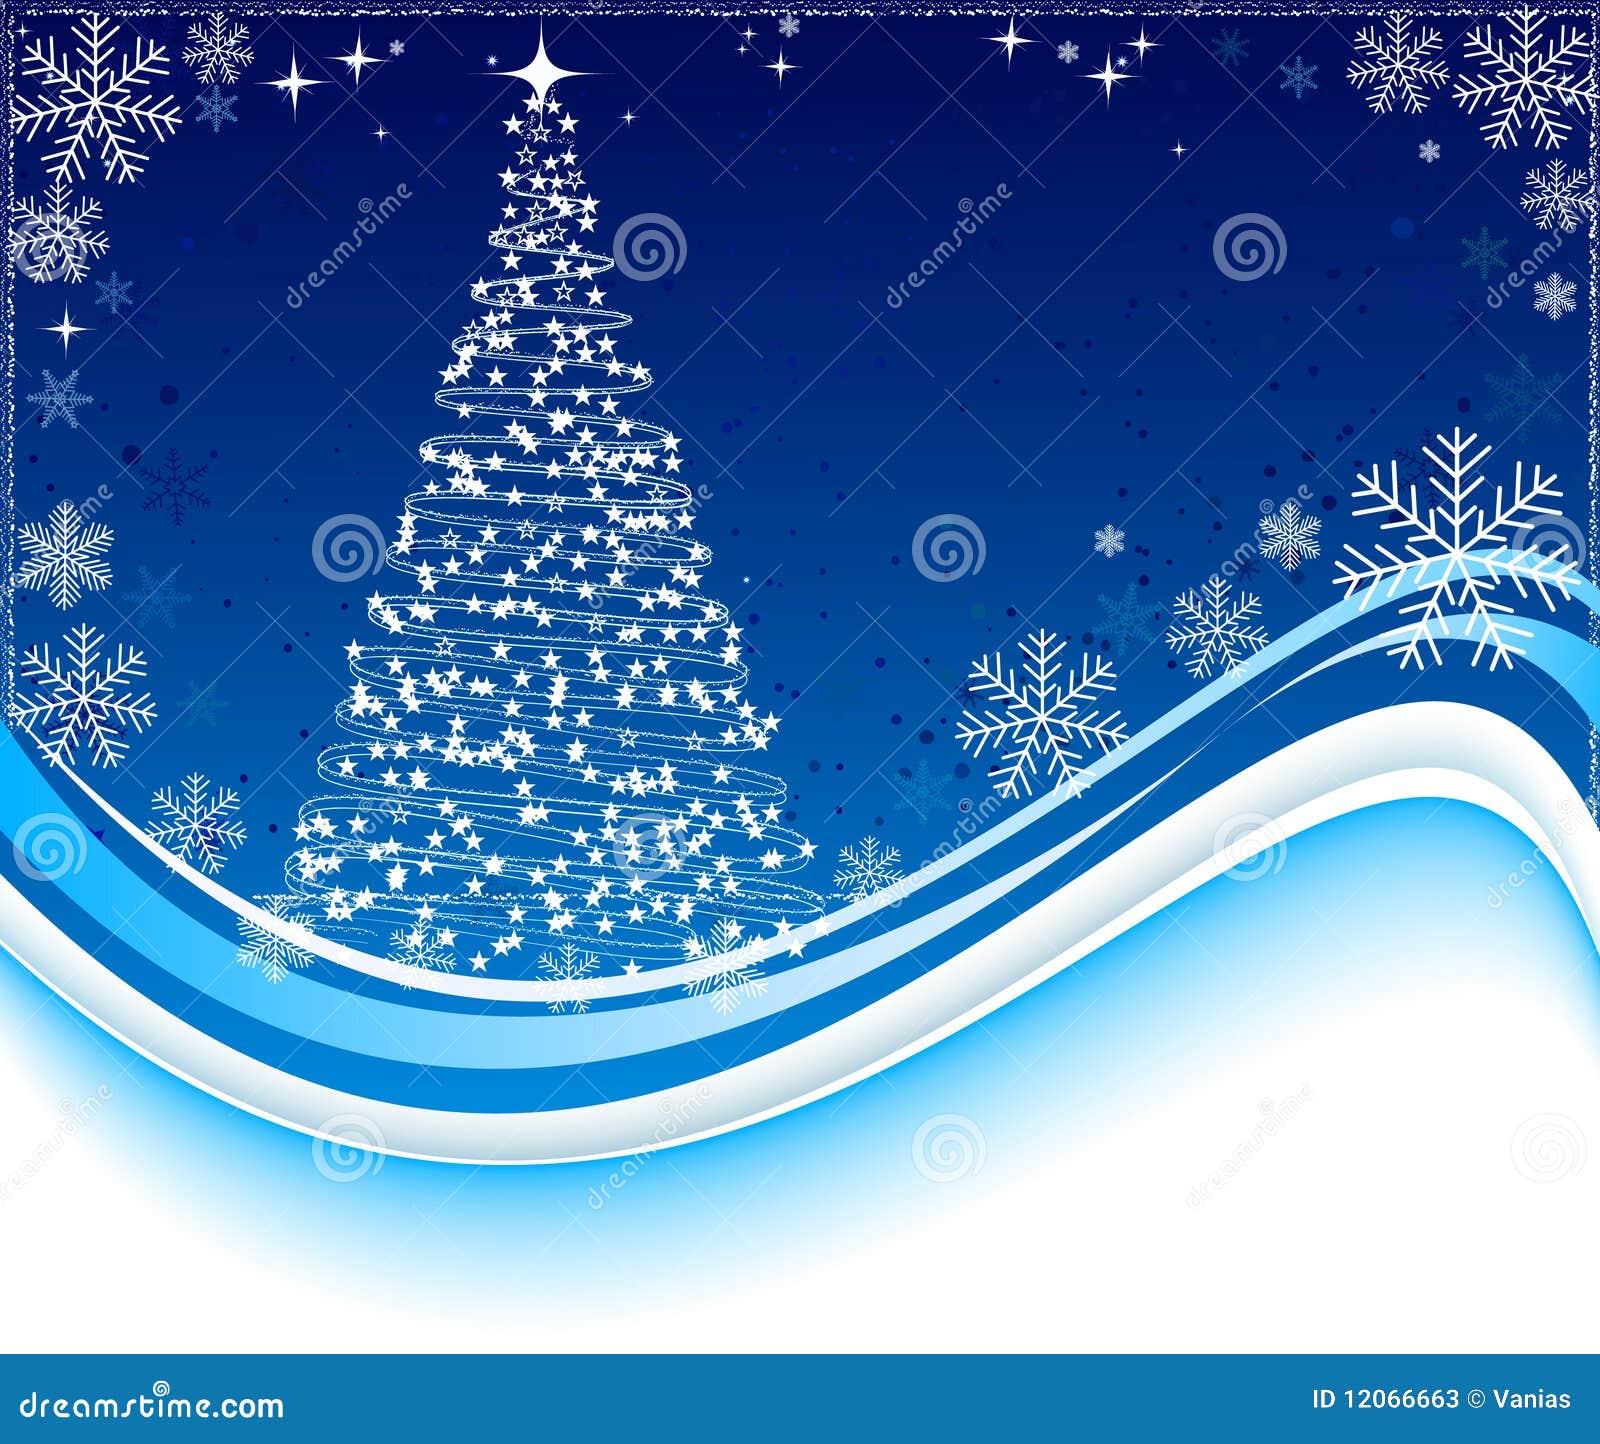 More similar stock images of ` Christmas decoration background `